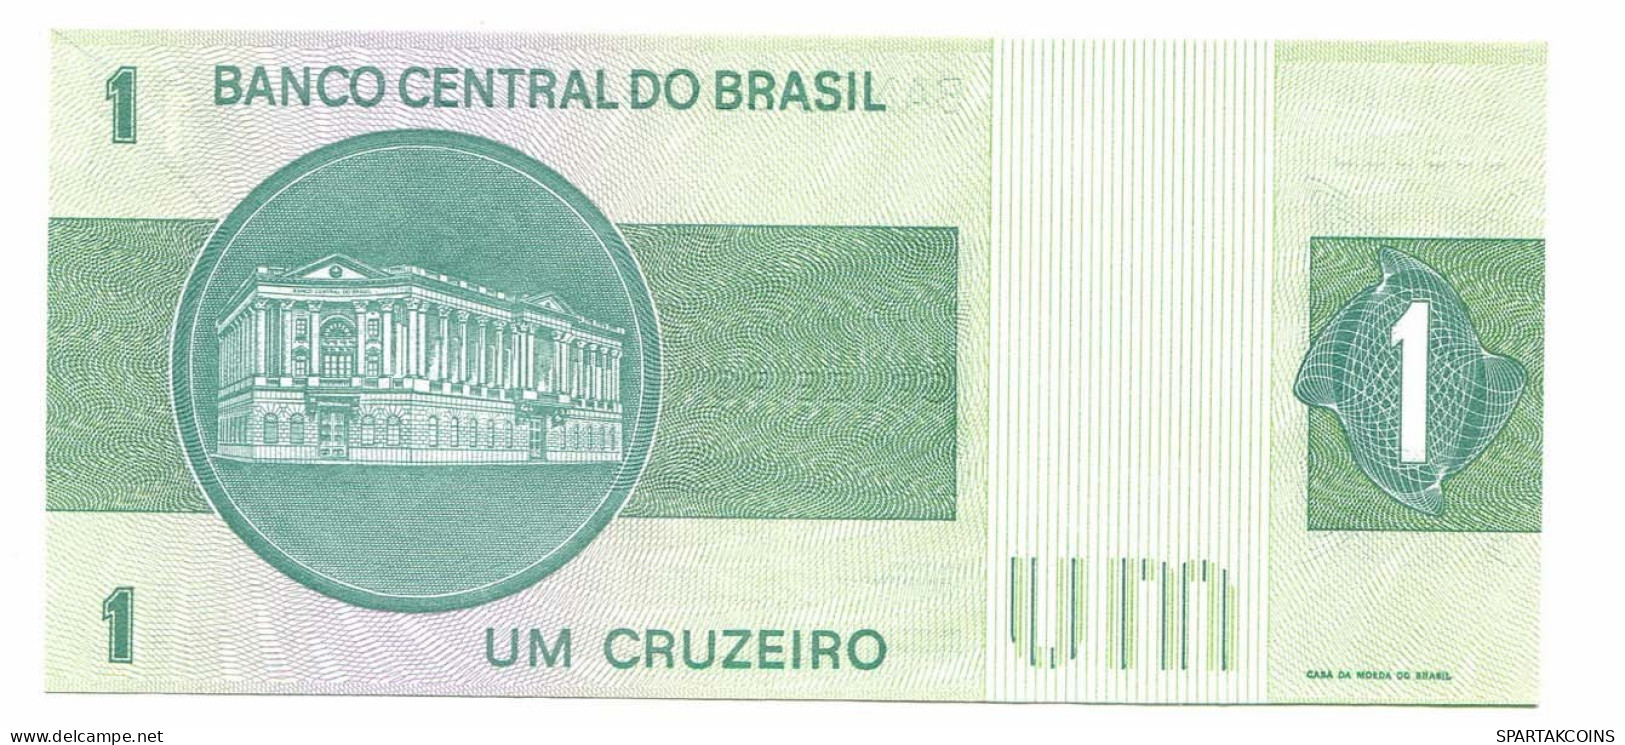 BRASIL 1 CRUZEIRO 1980 UNC Paper Money Banknote #P10826.4 - [11] Local Banknote Issues